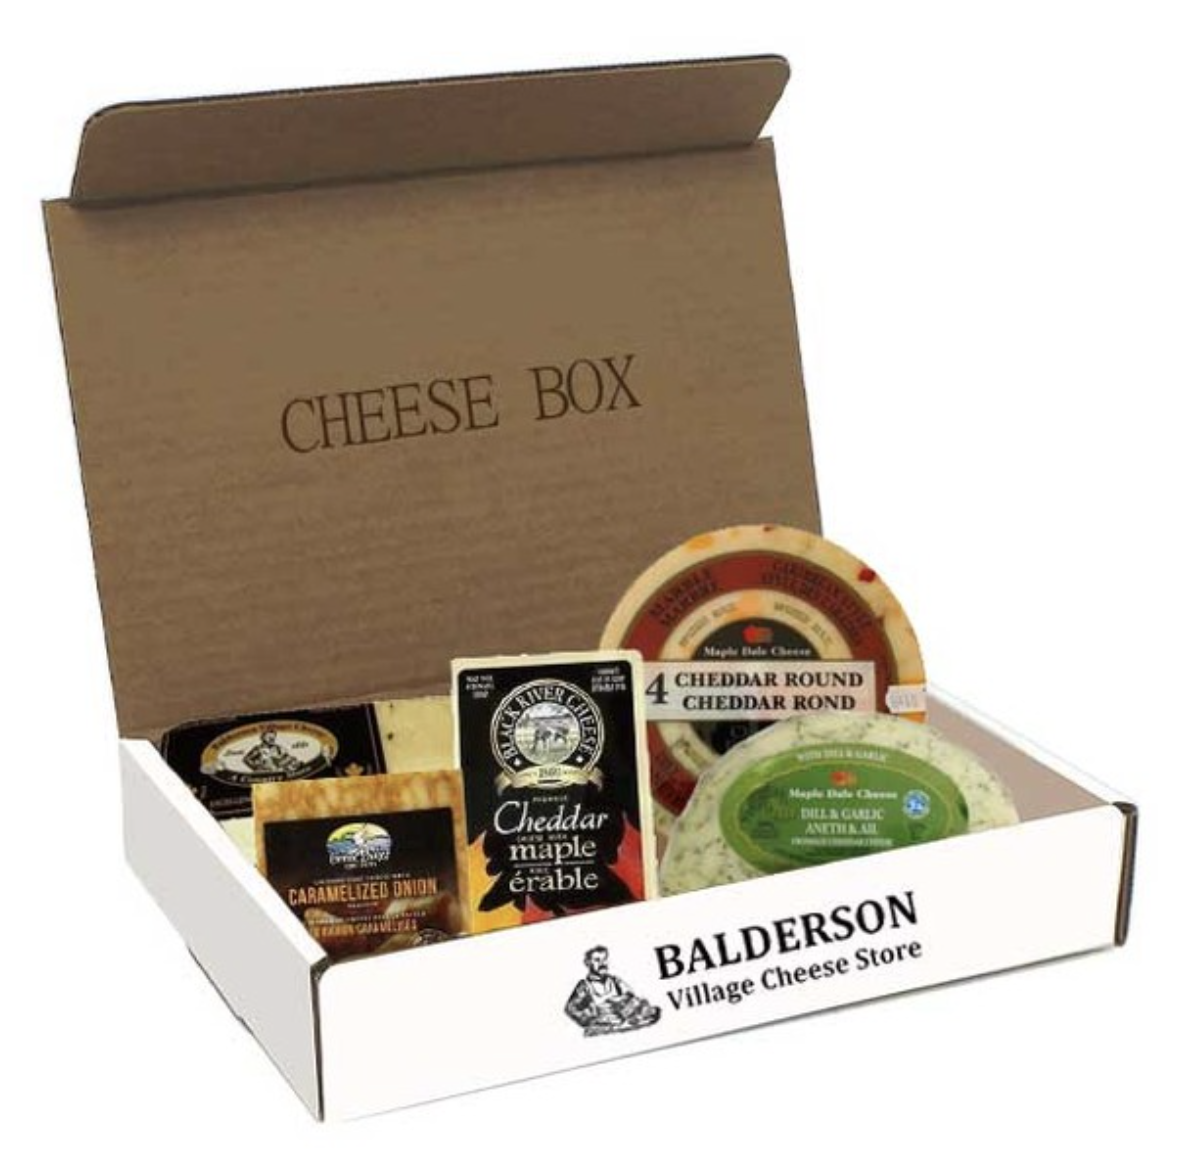 A cardboard box, opened and full of various cheeses.